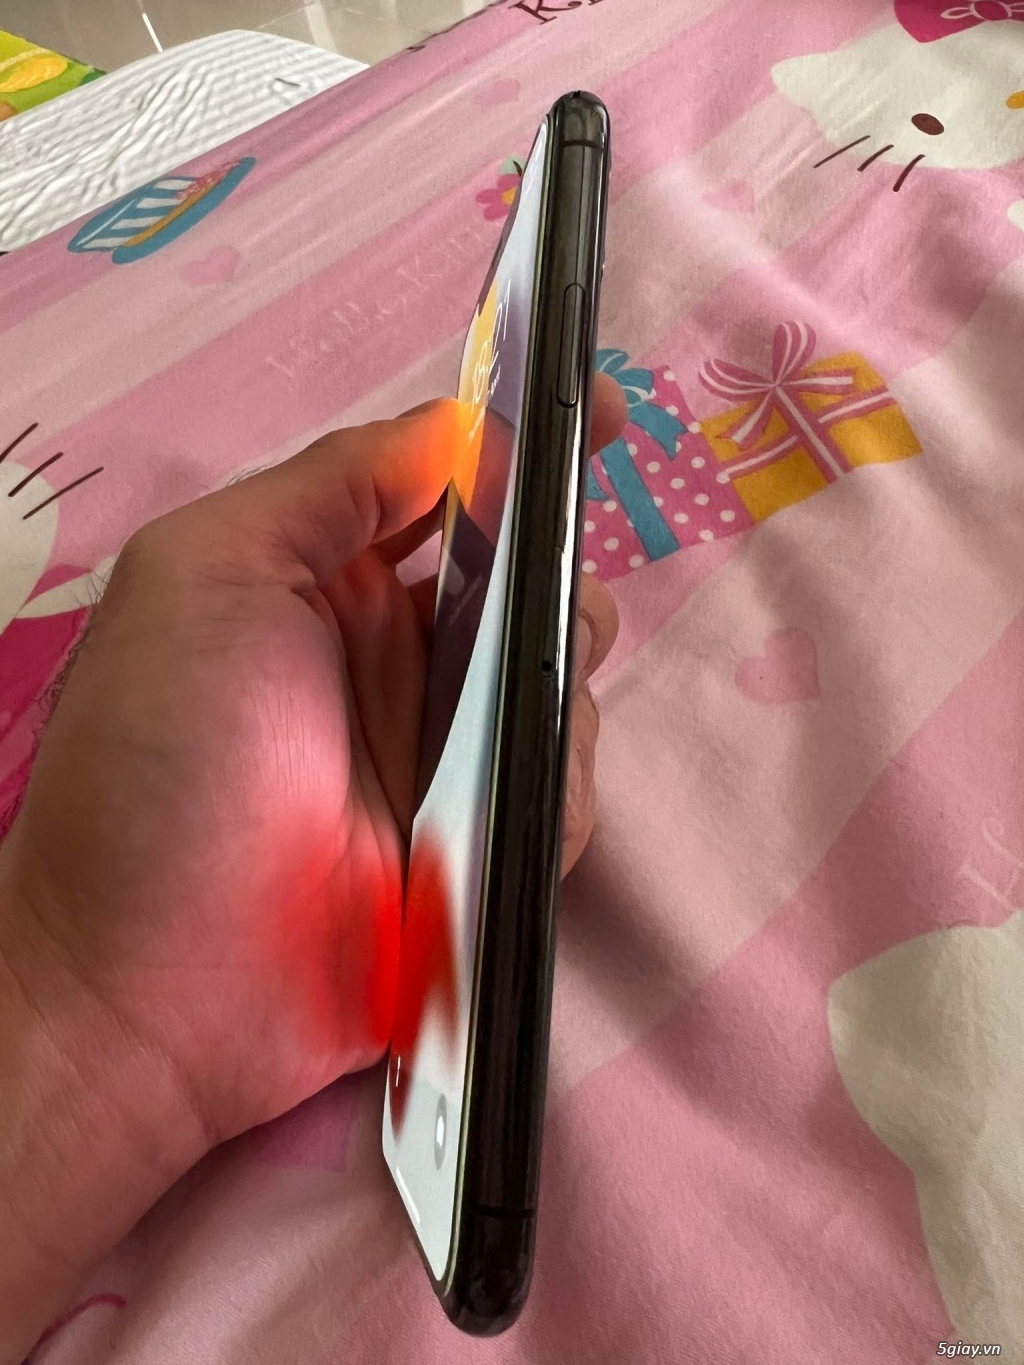 BÁN IPHONE 11 PRO MAX 256GB MỸ USED - 4